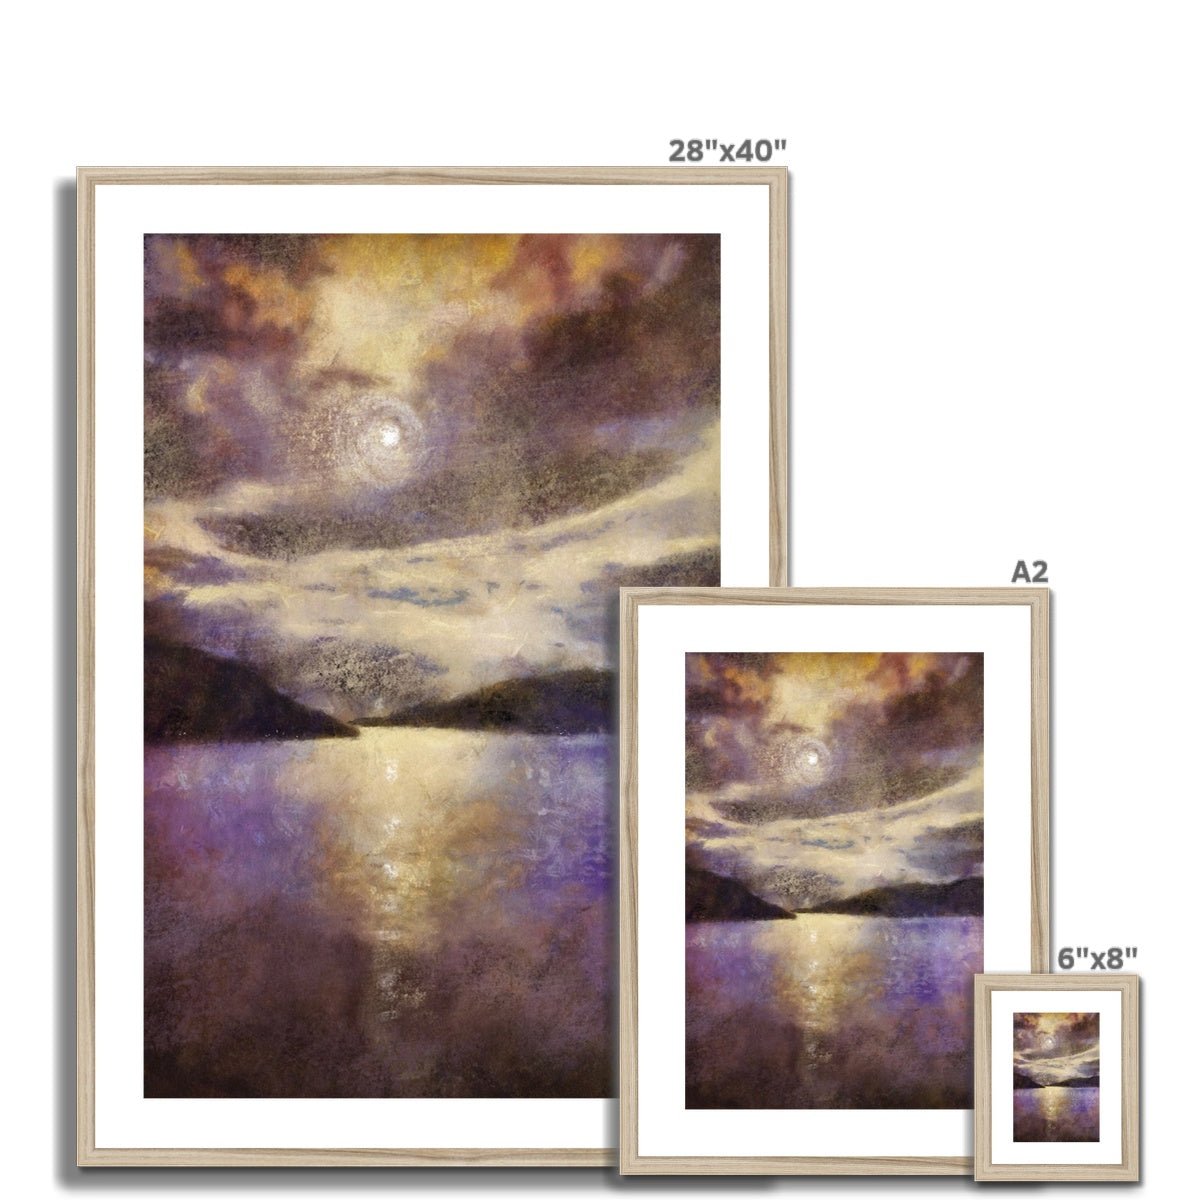 Moonlight Meets Lewis & Harris Painting | Framed & Mounted Prints From Scotland-Framed & Mounted Prints-Hebridean Islands Art Gallery-Paintings, Prints, Homeware, Art Gifts From Scotland By Scottish Artist Kevin Hunter